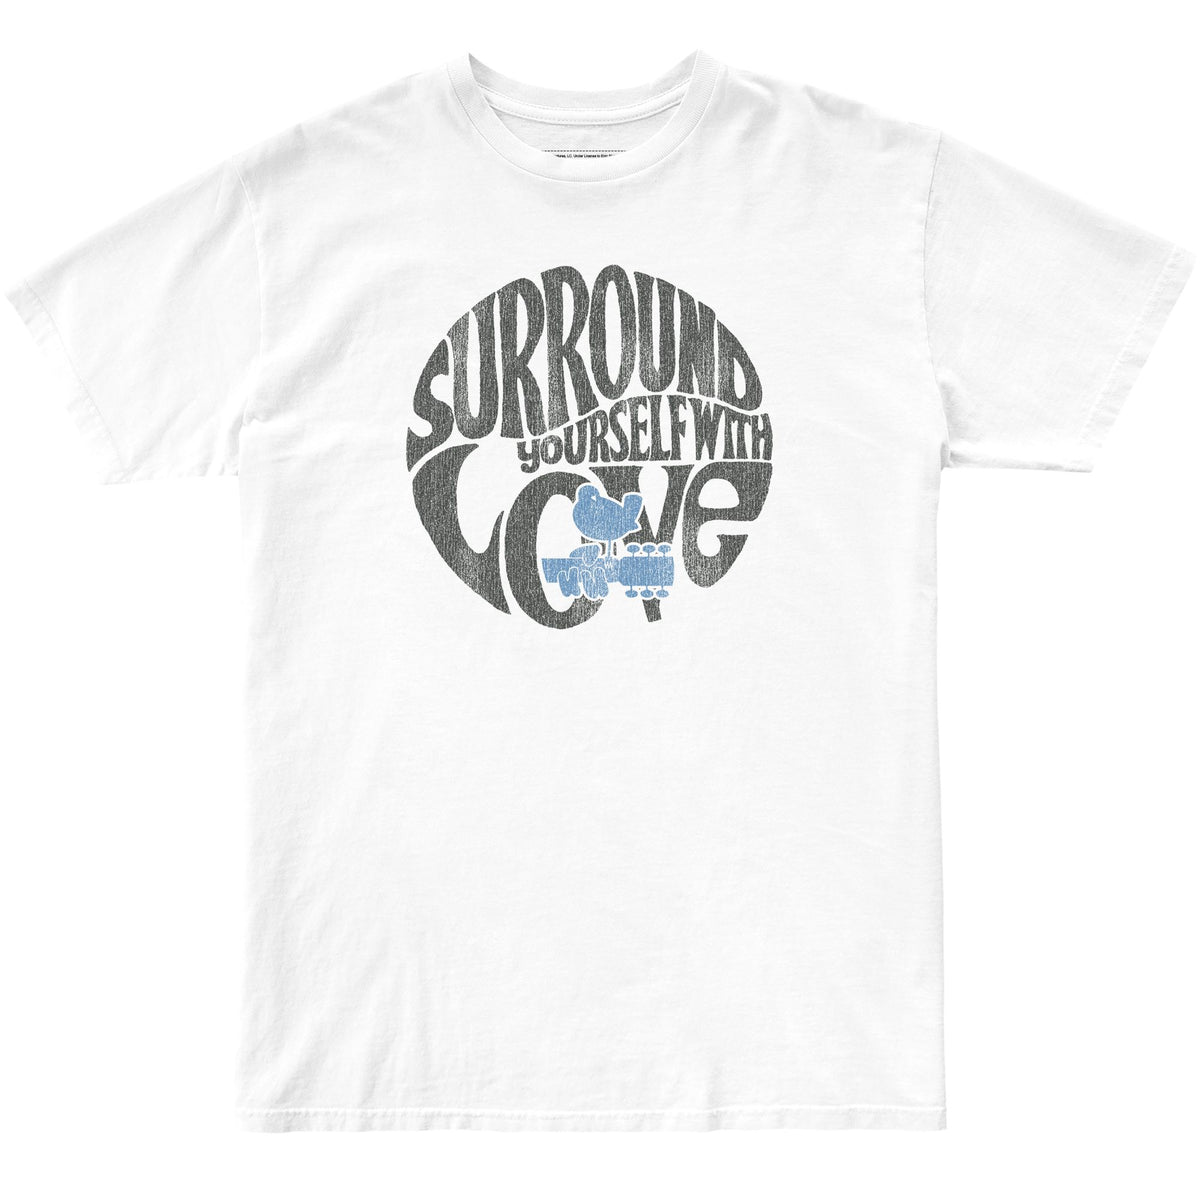 Wooodstock Surround Yourself with Love 100% Cotton Tee